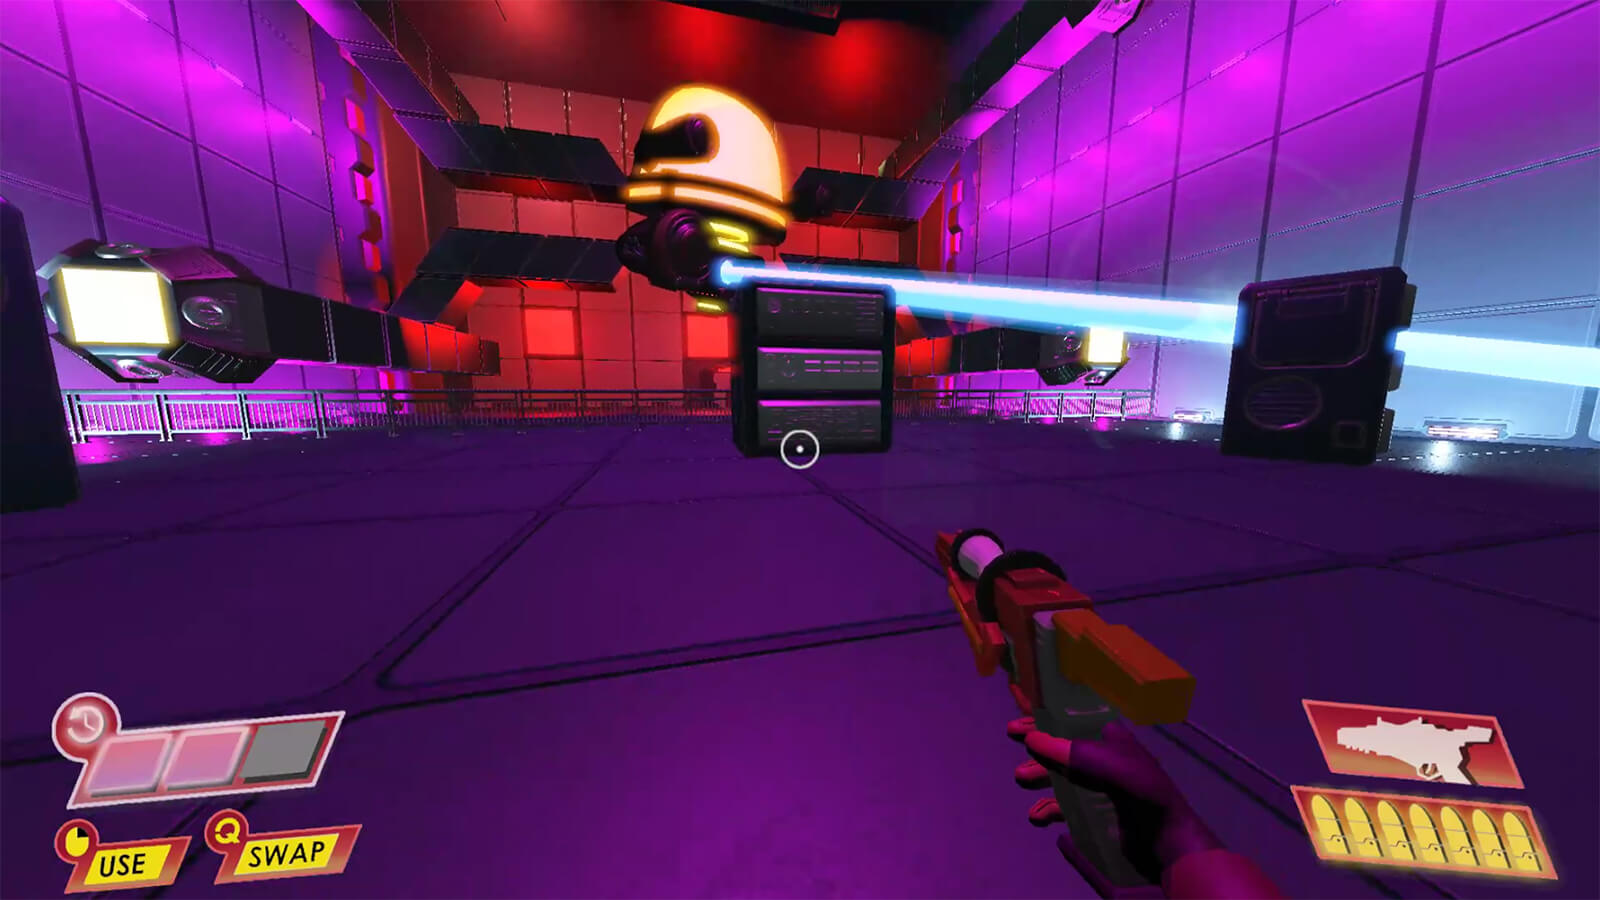 First-person view of magenta-hued room while aiming a futuristic pistol at a large, floating robot emitting a blue beam.